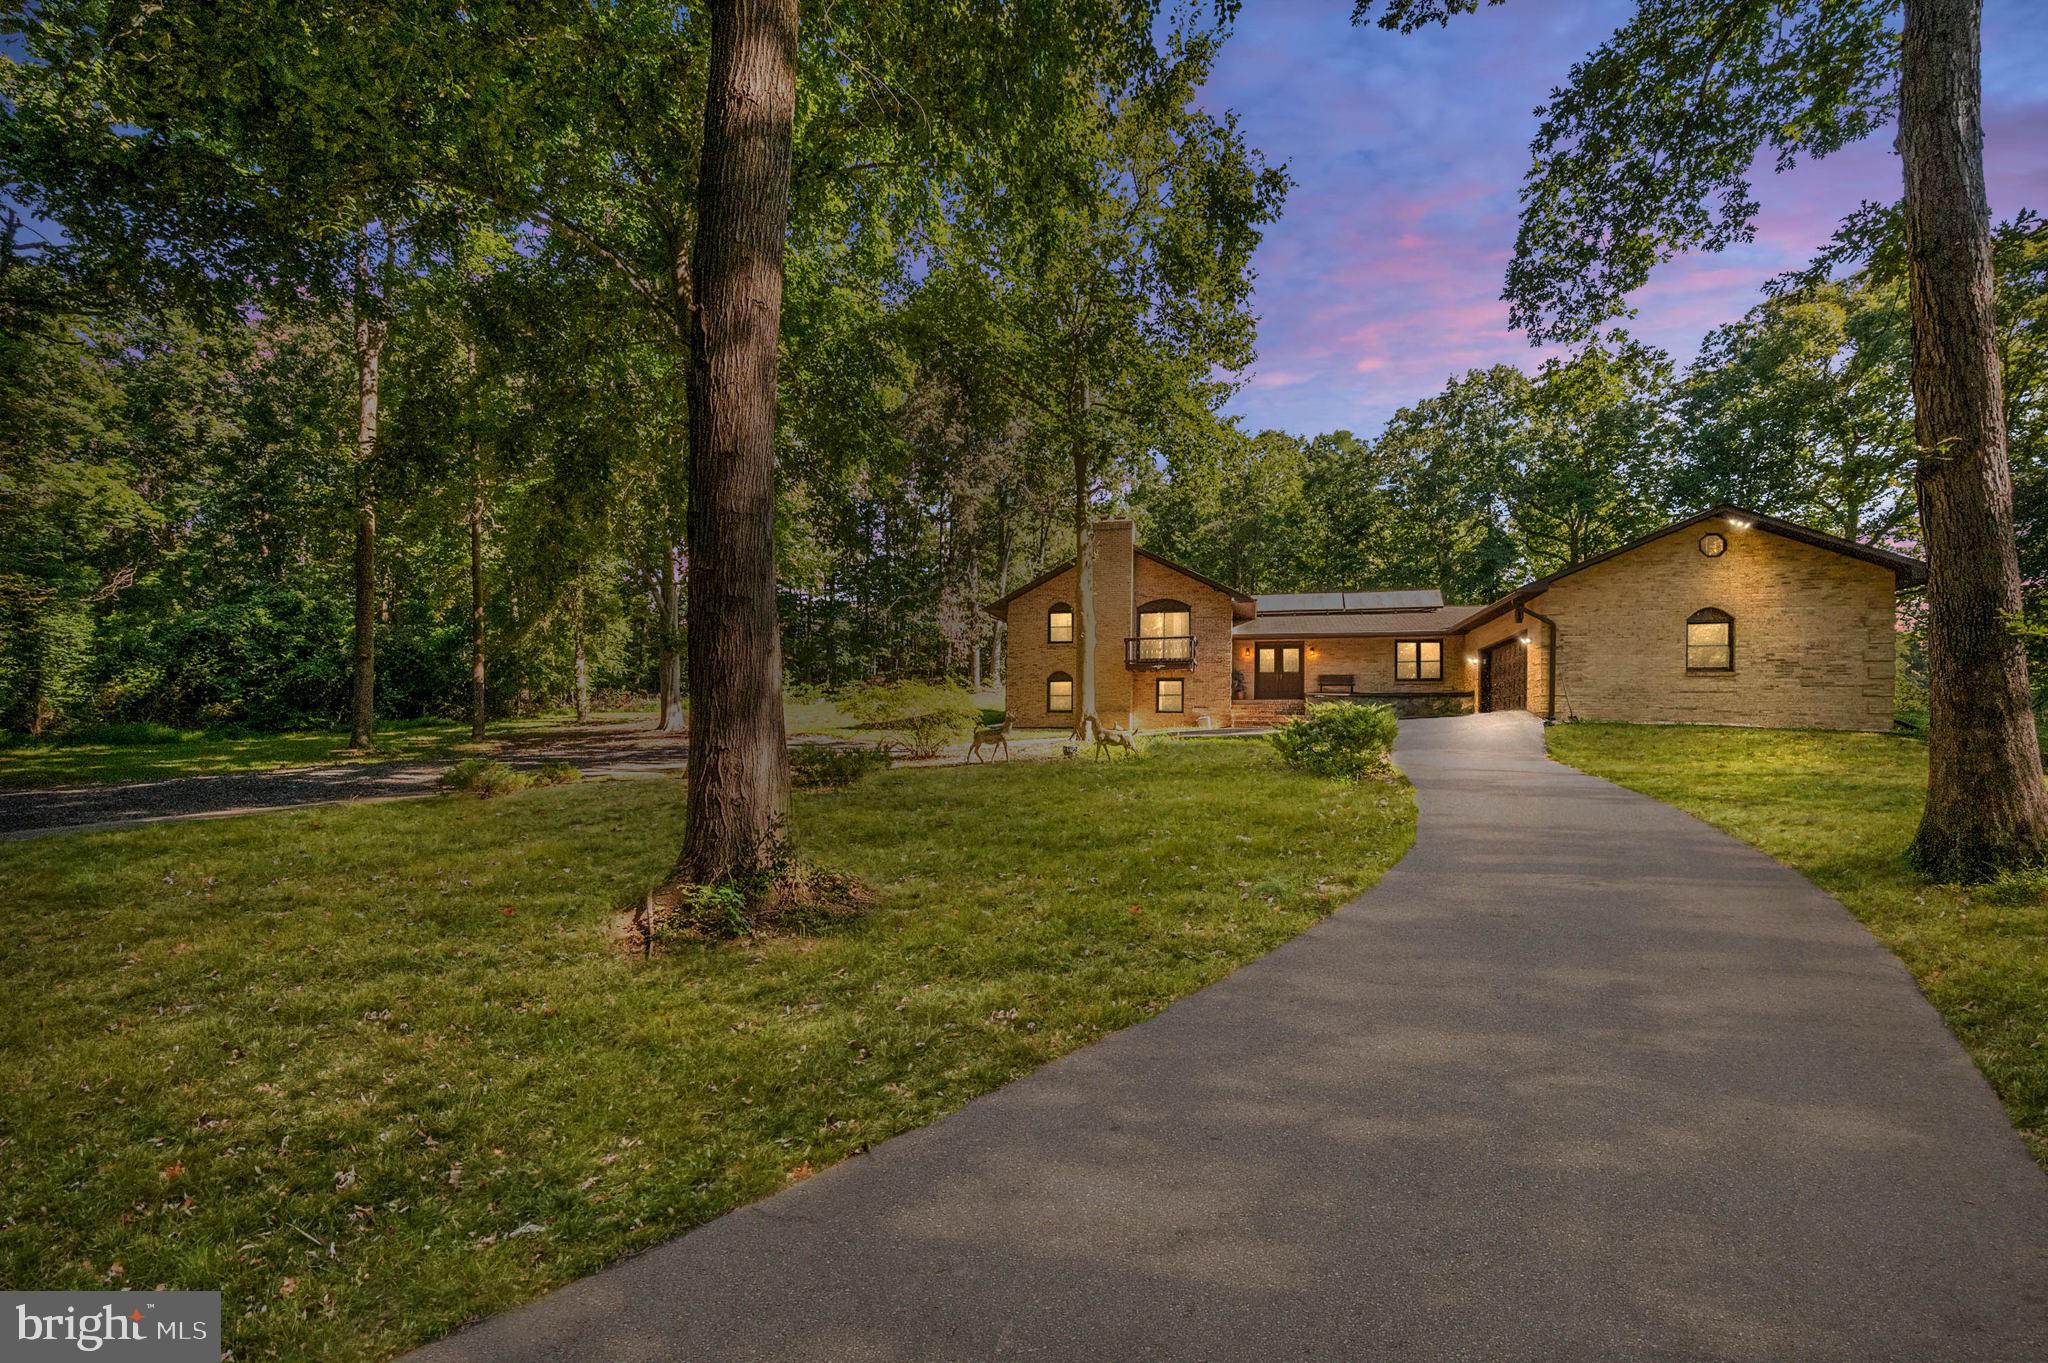 This One-of-a-kind stunning all Brick home is surrounded by beautiful hardwoods and water views of Quantico creek.  Zoned Agricultural with multi purpose use on two private park-like acres with No HOA! The long concrete circular driveway has ample parking for 20+ cars and can house all your commercial & recreational vehicles, boats and more! Plus, there's an attached 2 1/2 garage. This desirable location is minutes to all the conveniences you need such as Rte. 1, I-95, and shopping.  The 600+ sq.ft renovated kitchen with adjoining dining area is the perfect entertaining space.  It features a huge kitchen island with granite countertops, upgraded cabinetry, newer appliances, built-in cabinet for your coffee bar, and tons of lighting. This 4-level home includes two living spaces so there's plenty of room for everyone.  You'll love all the modern touches throughout from the stair railings, light fixtures, and 2 electric fireplaces.  Large and Updated bathrooms with tile surround and soaker tub to relax in.  Extra room in the basement can be used as a 4th bedroom (NTC). And there are so many possibilities with the enclosed pool area.  Home is available fully furnished with acceptable offer.